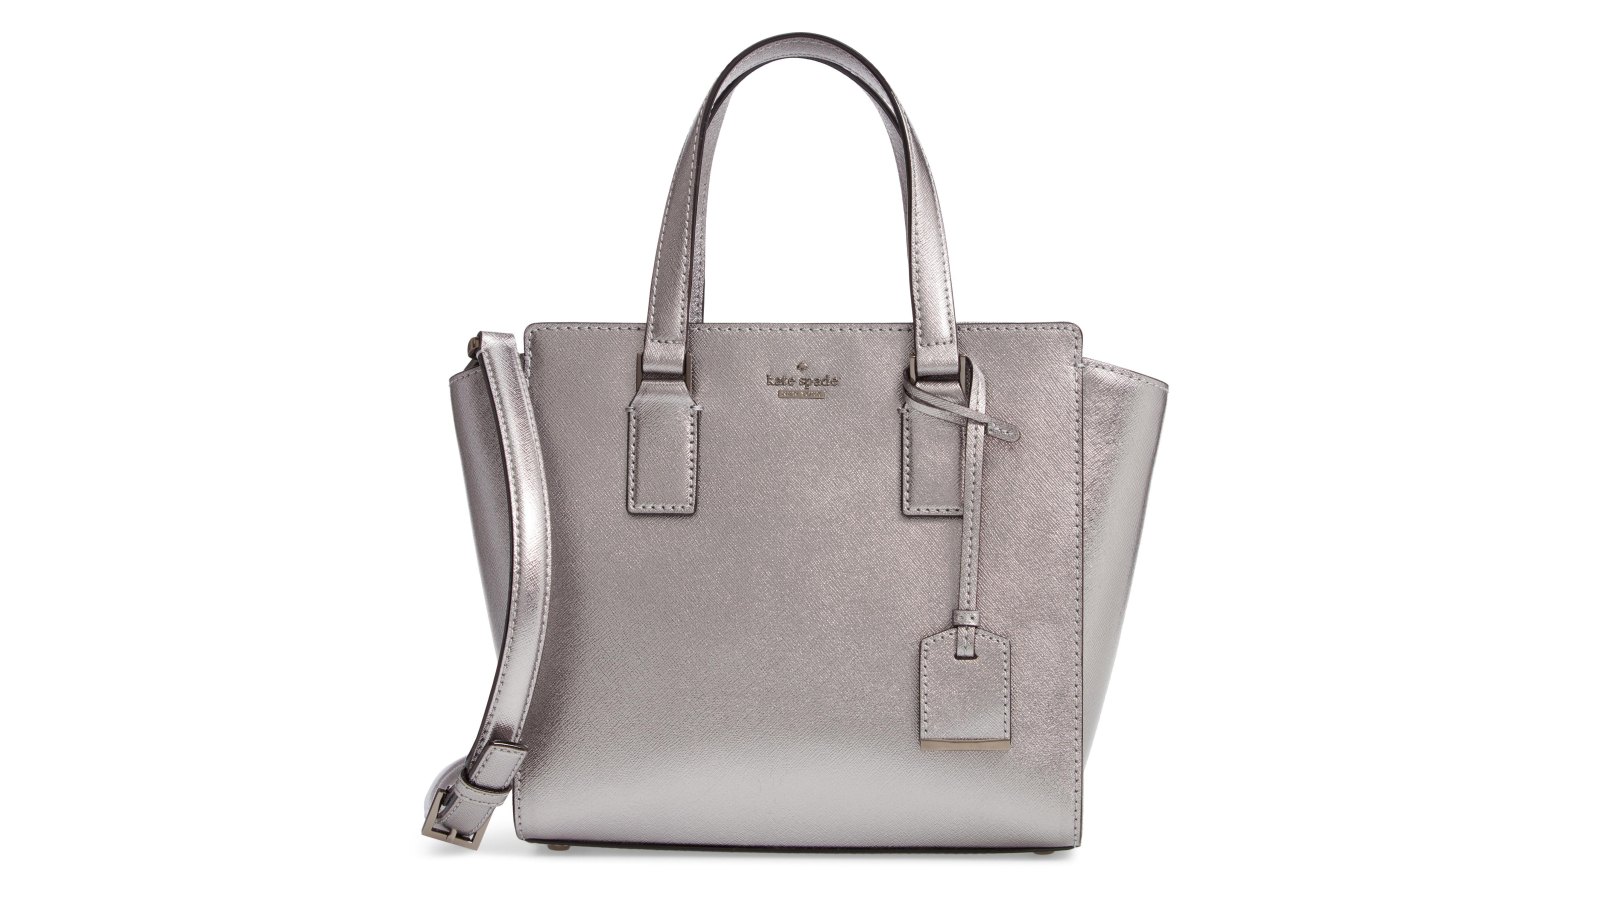 The Perfect Metallic Kate Spade Bag to Update Any Wardrobe